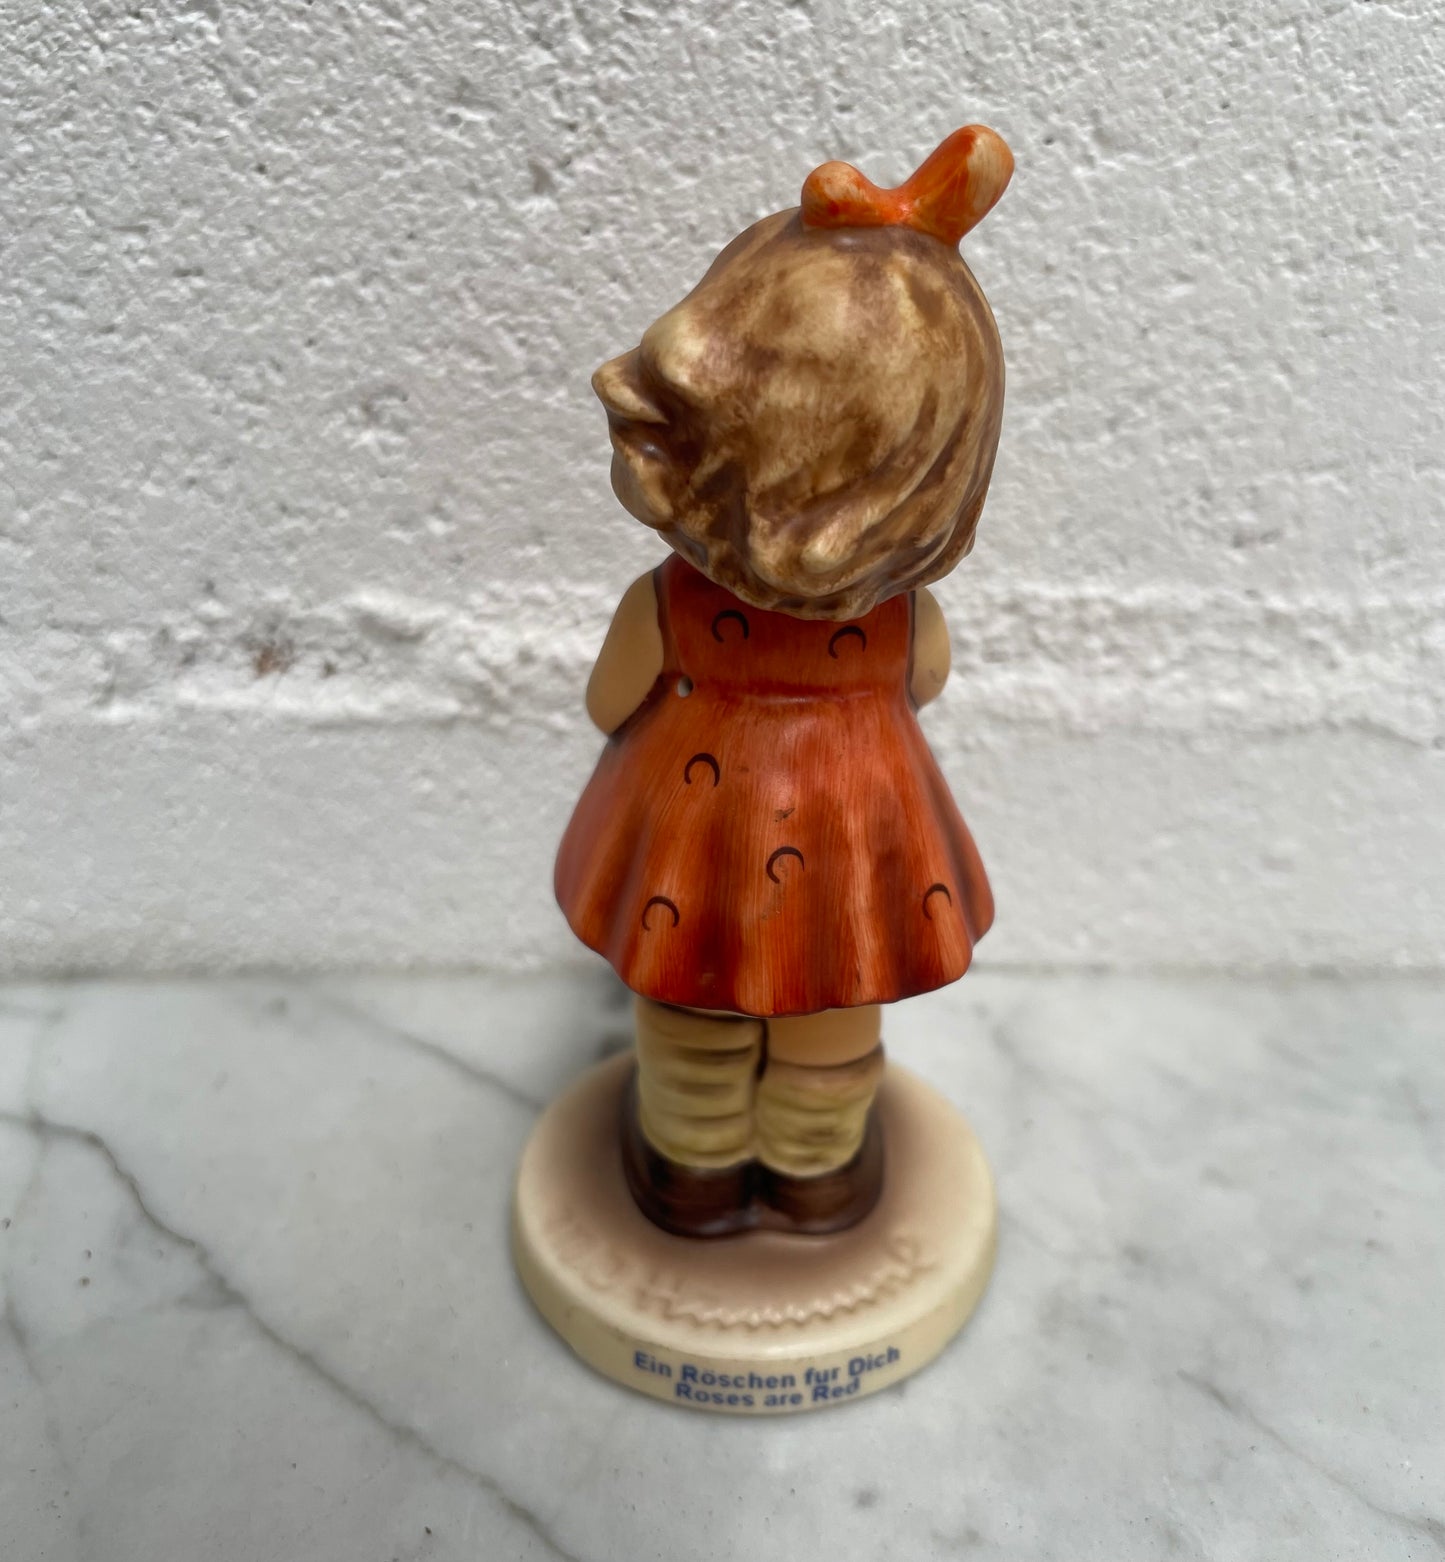 Fabulous Hummel figurine "Roses are Red" dated 1993 and in good original condition. Please see photos as they form part of the description.